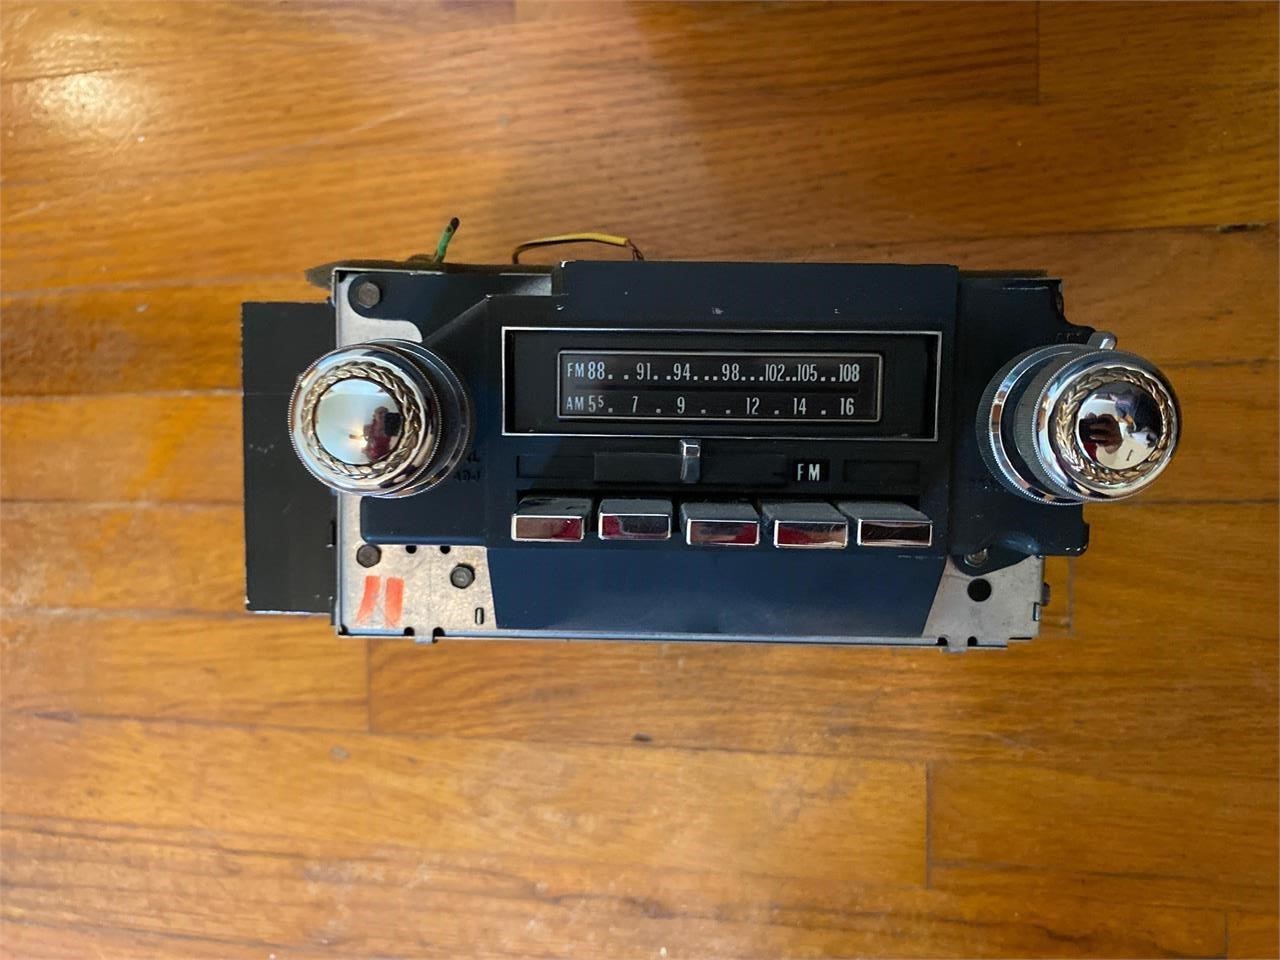 1974 Cadillac 8 Track Player